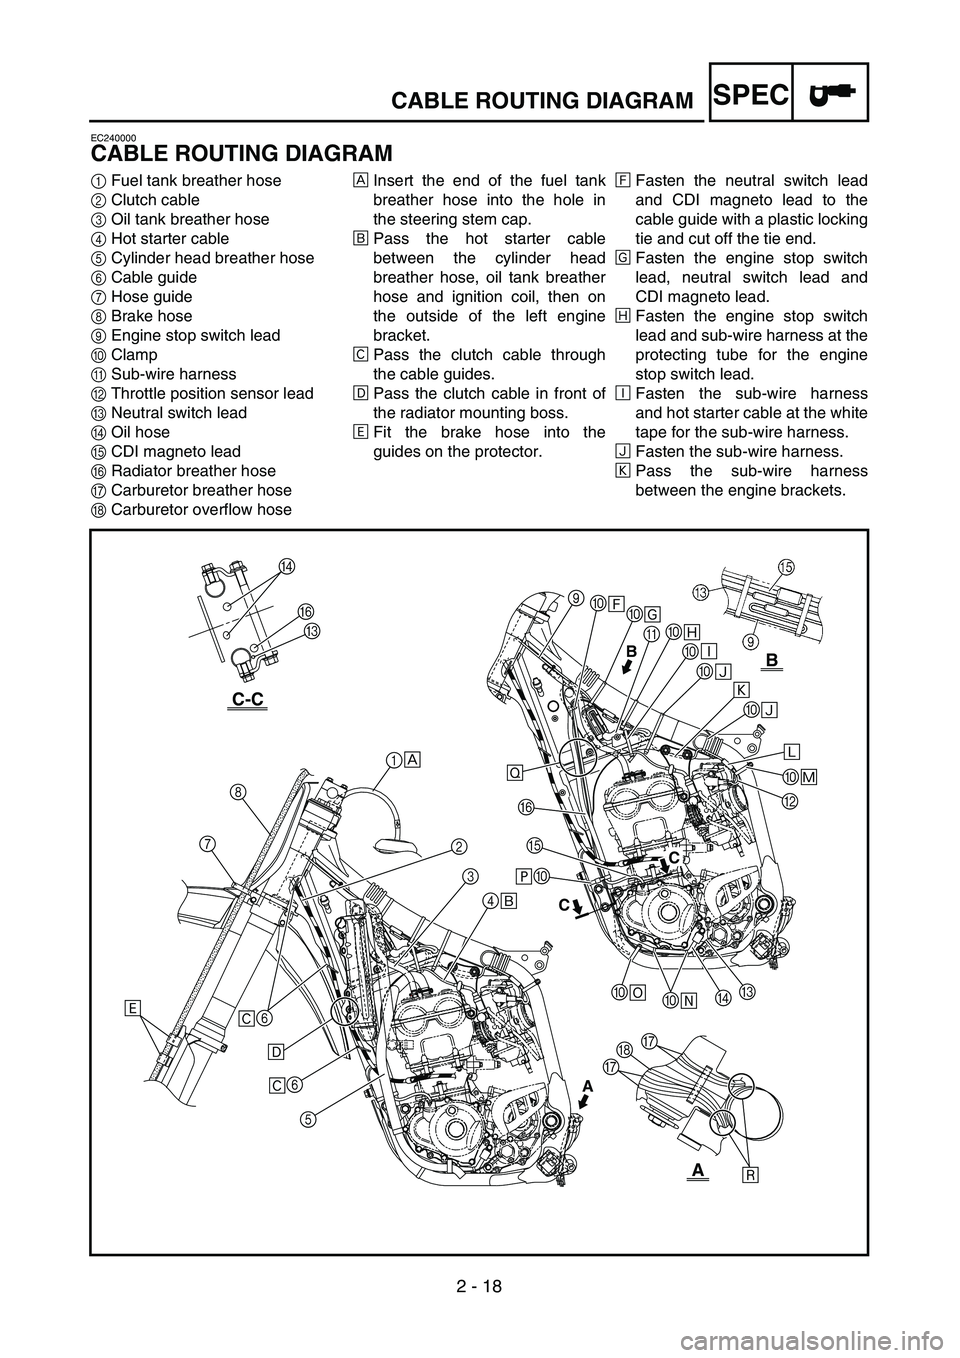 YAMAHA YZ250F 2004  Notices Demploi (in French)  
2 - 18
SPEC
 
CABLE ROUTING DIAGRAM 
EC240000 
CABLE ROUTING DIAGRAM 
1  
Fuel tank breather hose  
2  
Clutch cable  
3  
Oil tank breather hose  
4 
Hot starter cable  
5 
Cylinder head breather h